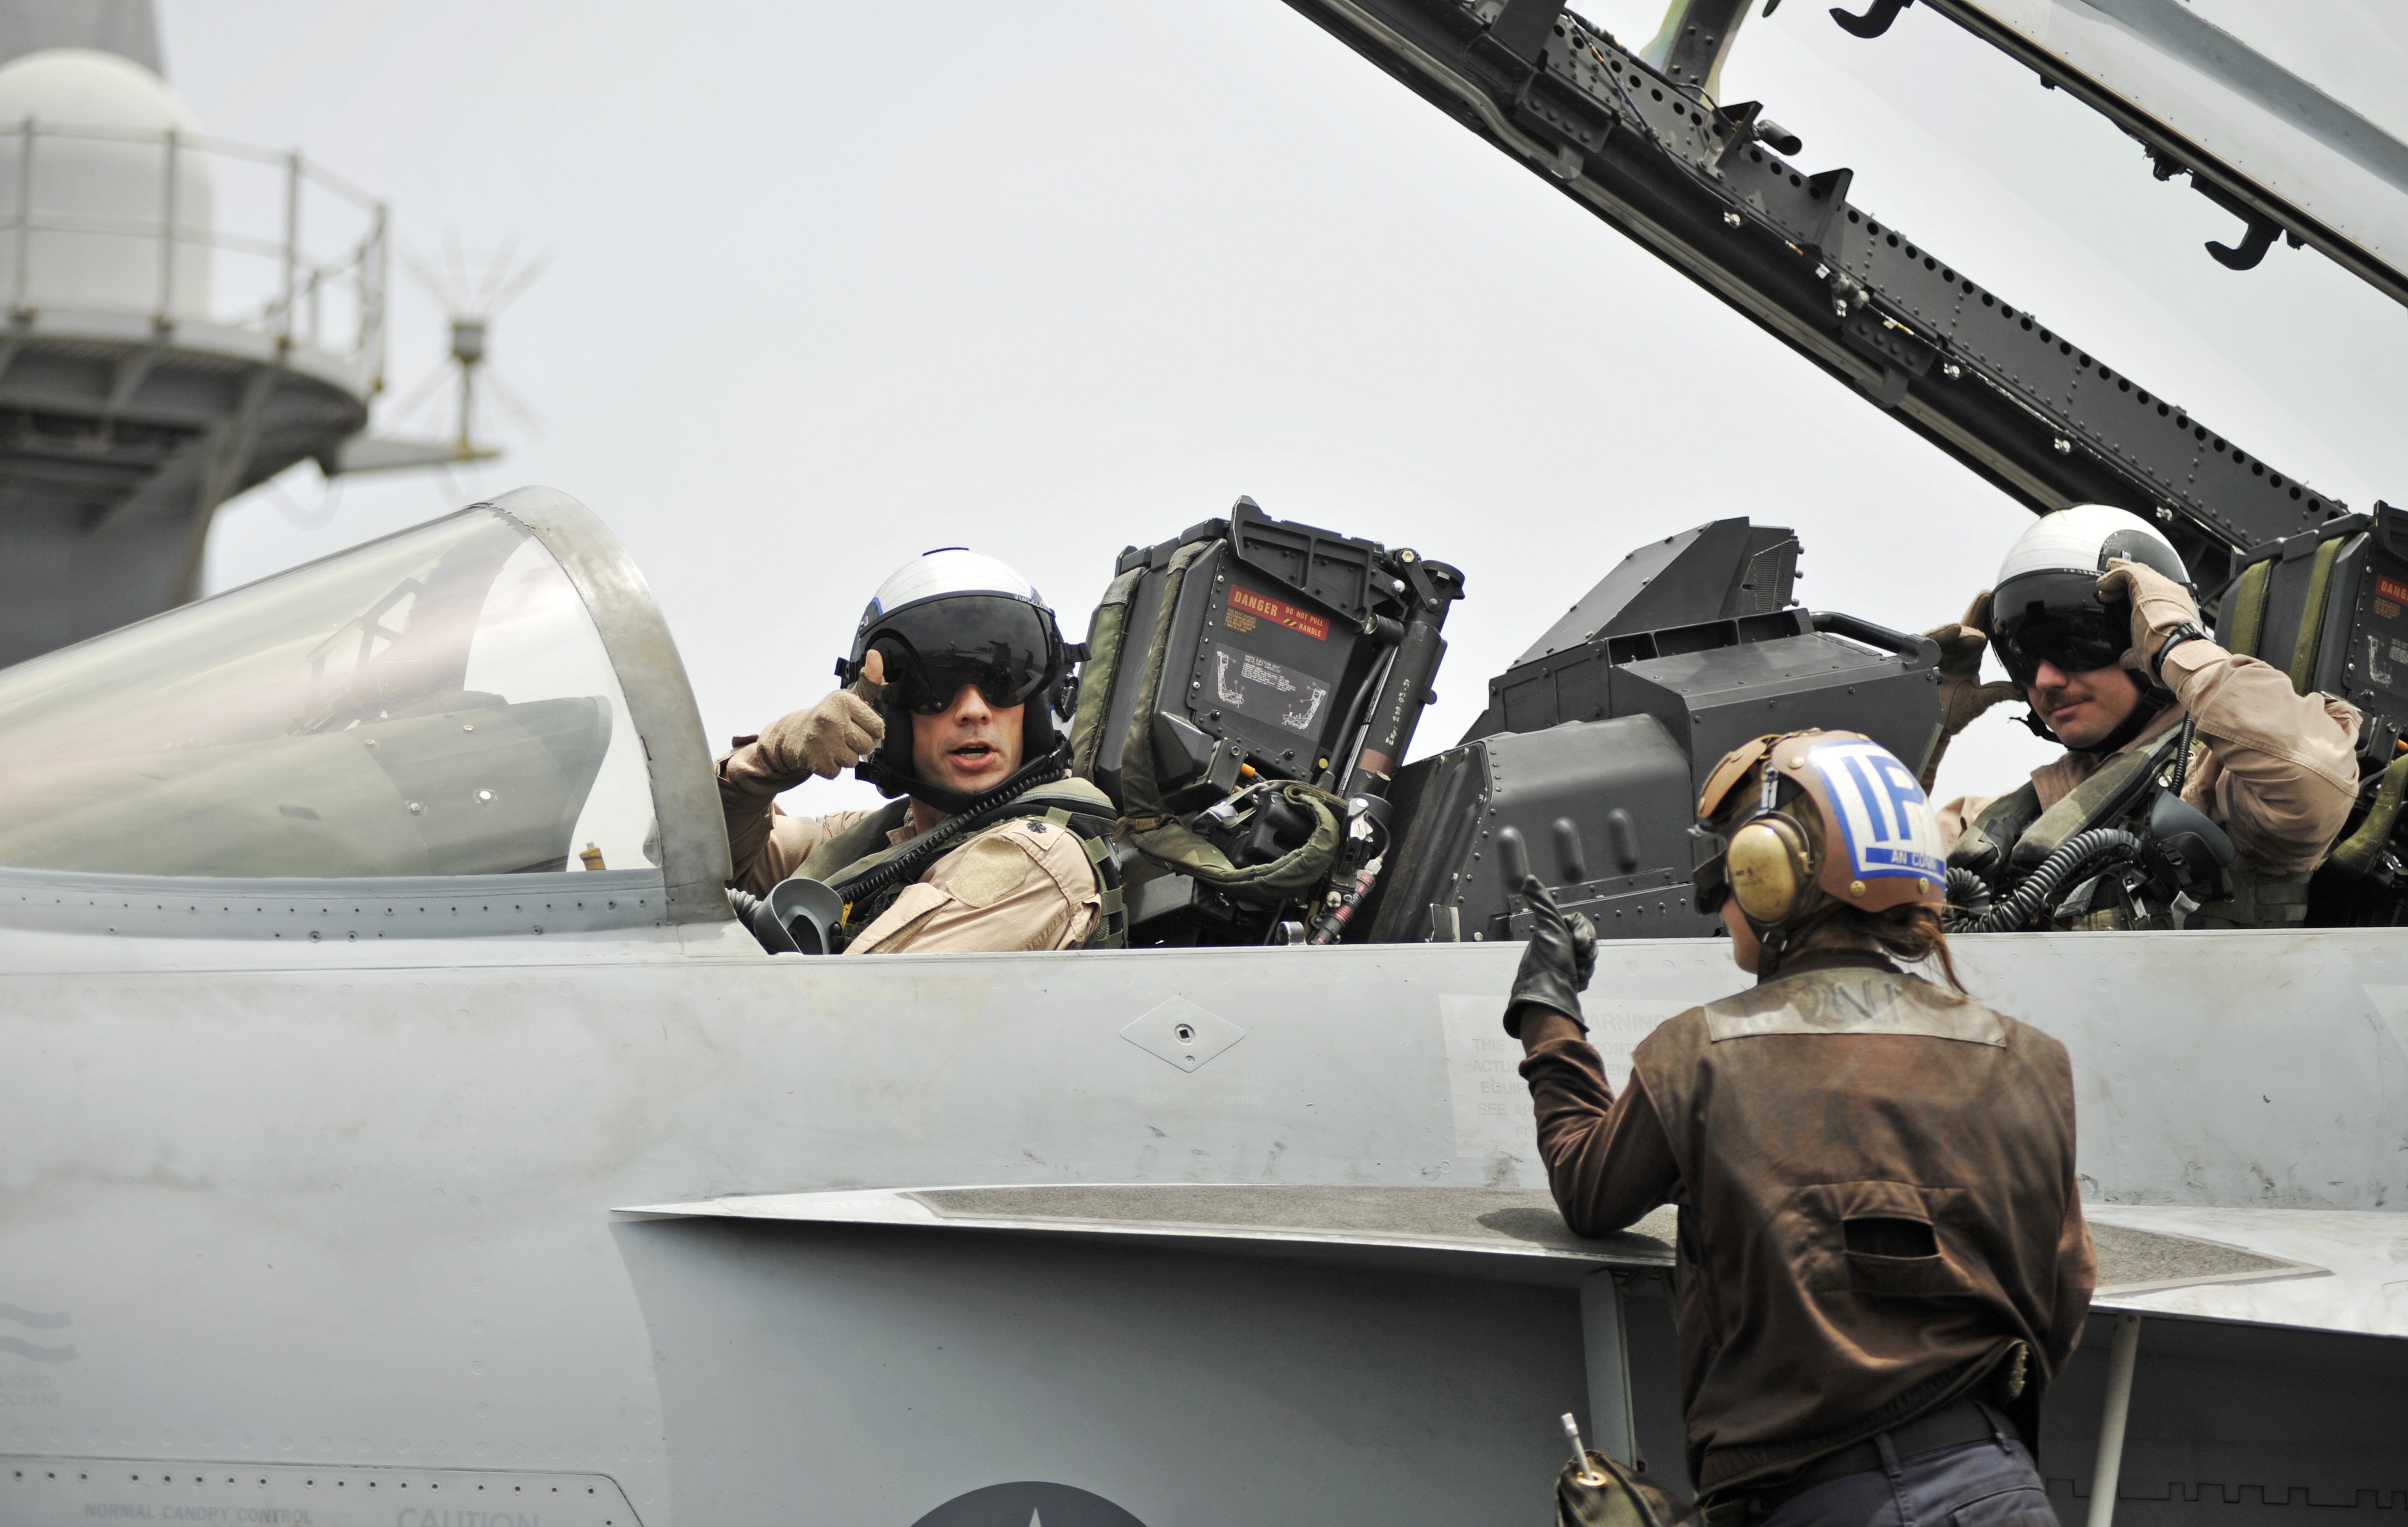 File:US Navy 100725-N-6003P-109 Cmdr. Chad Vincelette, executive officer of  the Swordsmen of Strike Fighter Squadron (VFA) 32.jpg - Wikimedia Commons